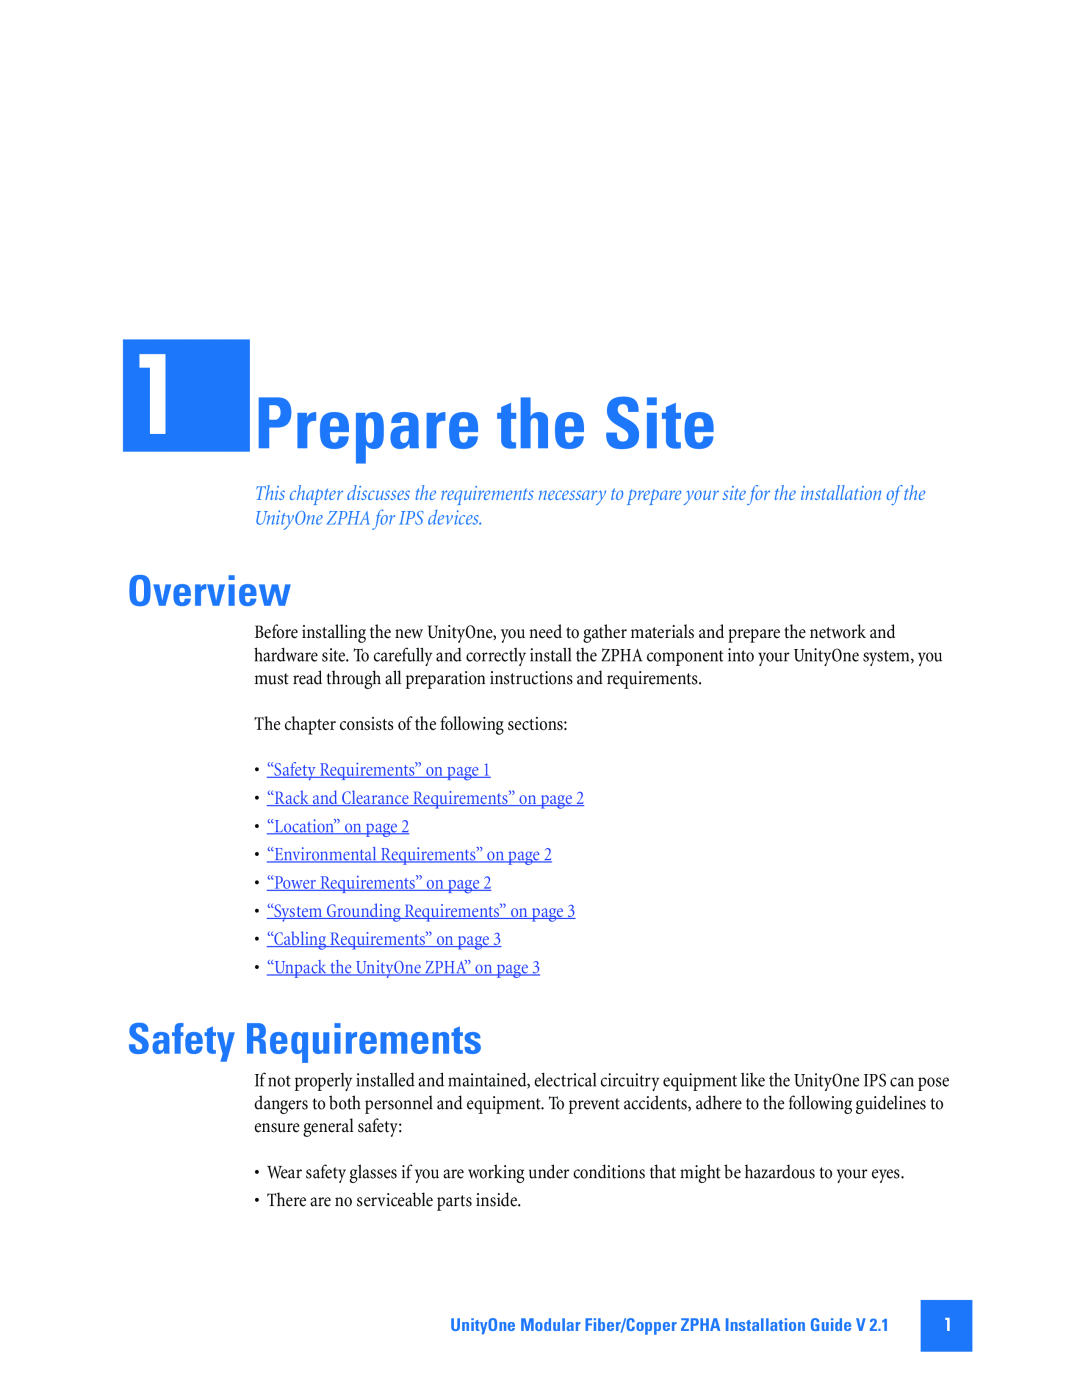 3Com TECHD-0000000050 manual Prepare the Site, Overview, “Safety Requirements” on page 